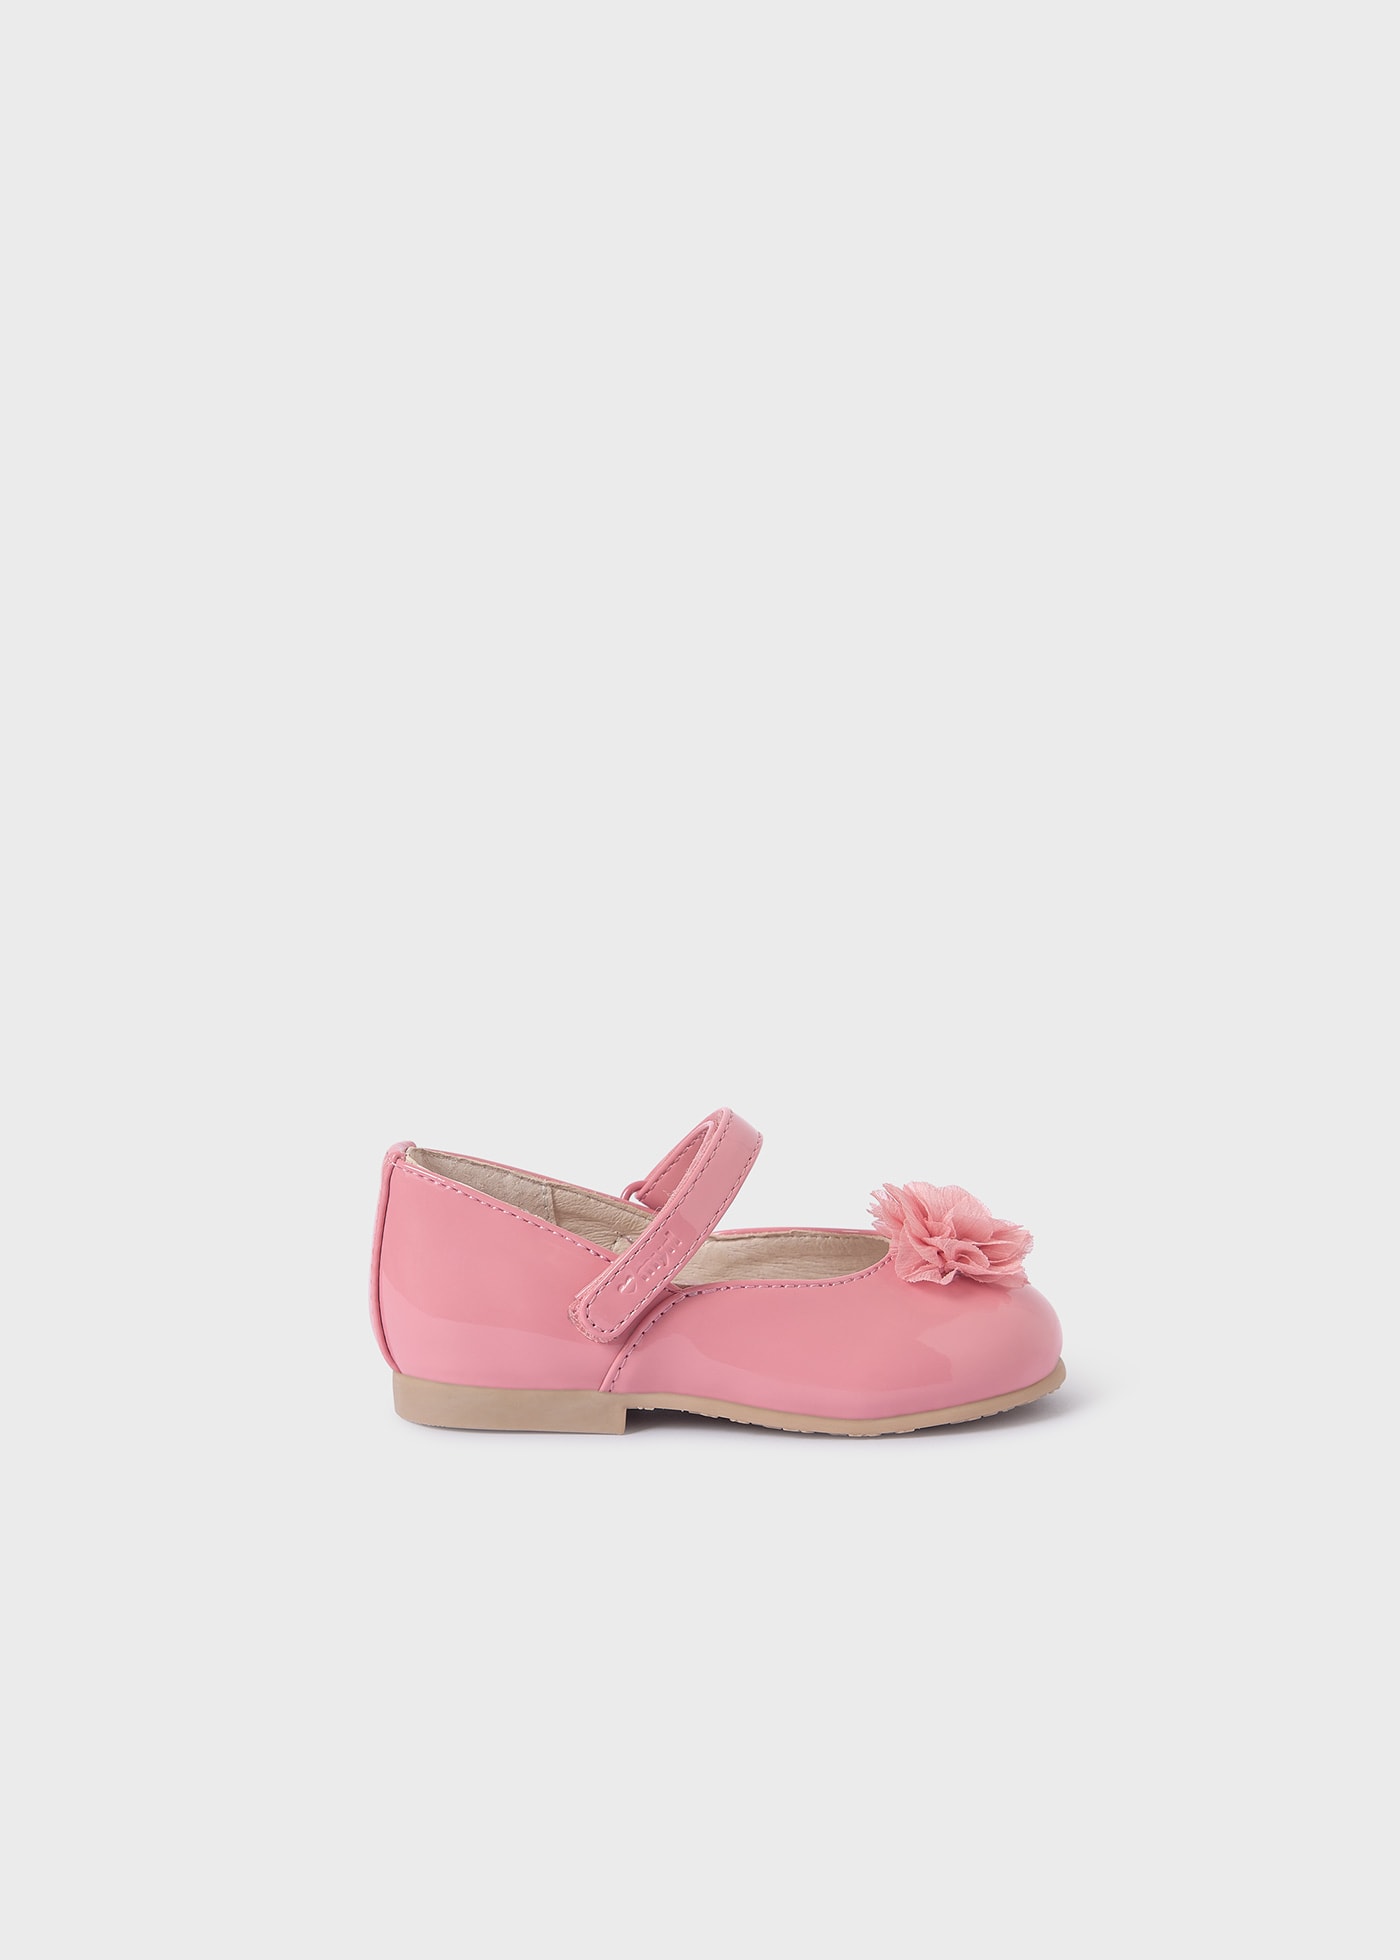 Baby mary jane sustainable patent leather